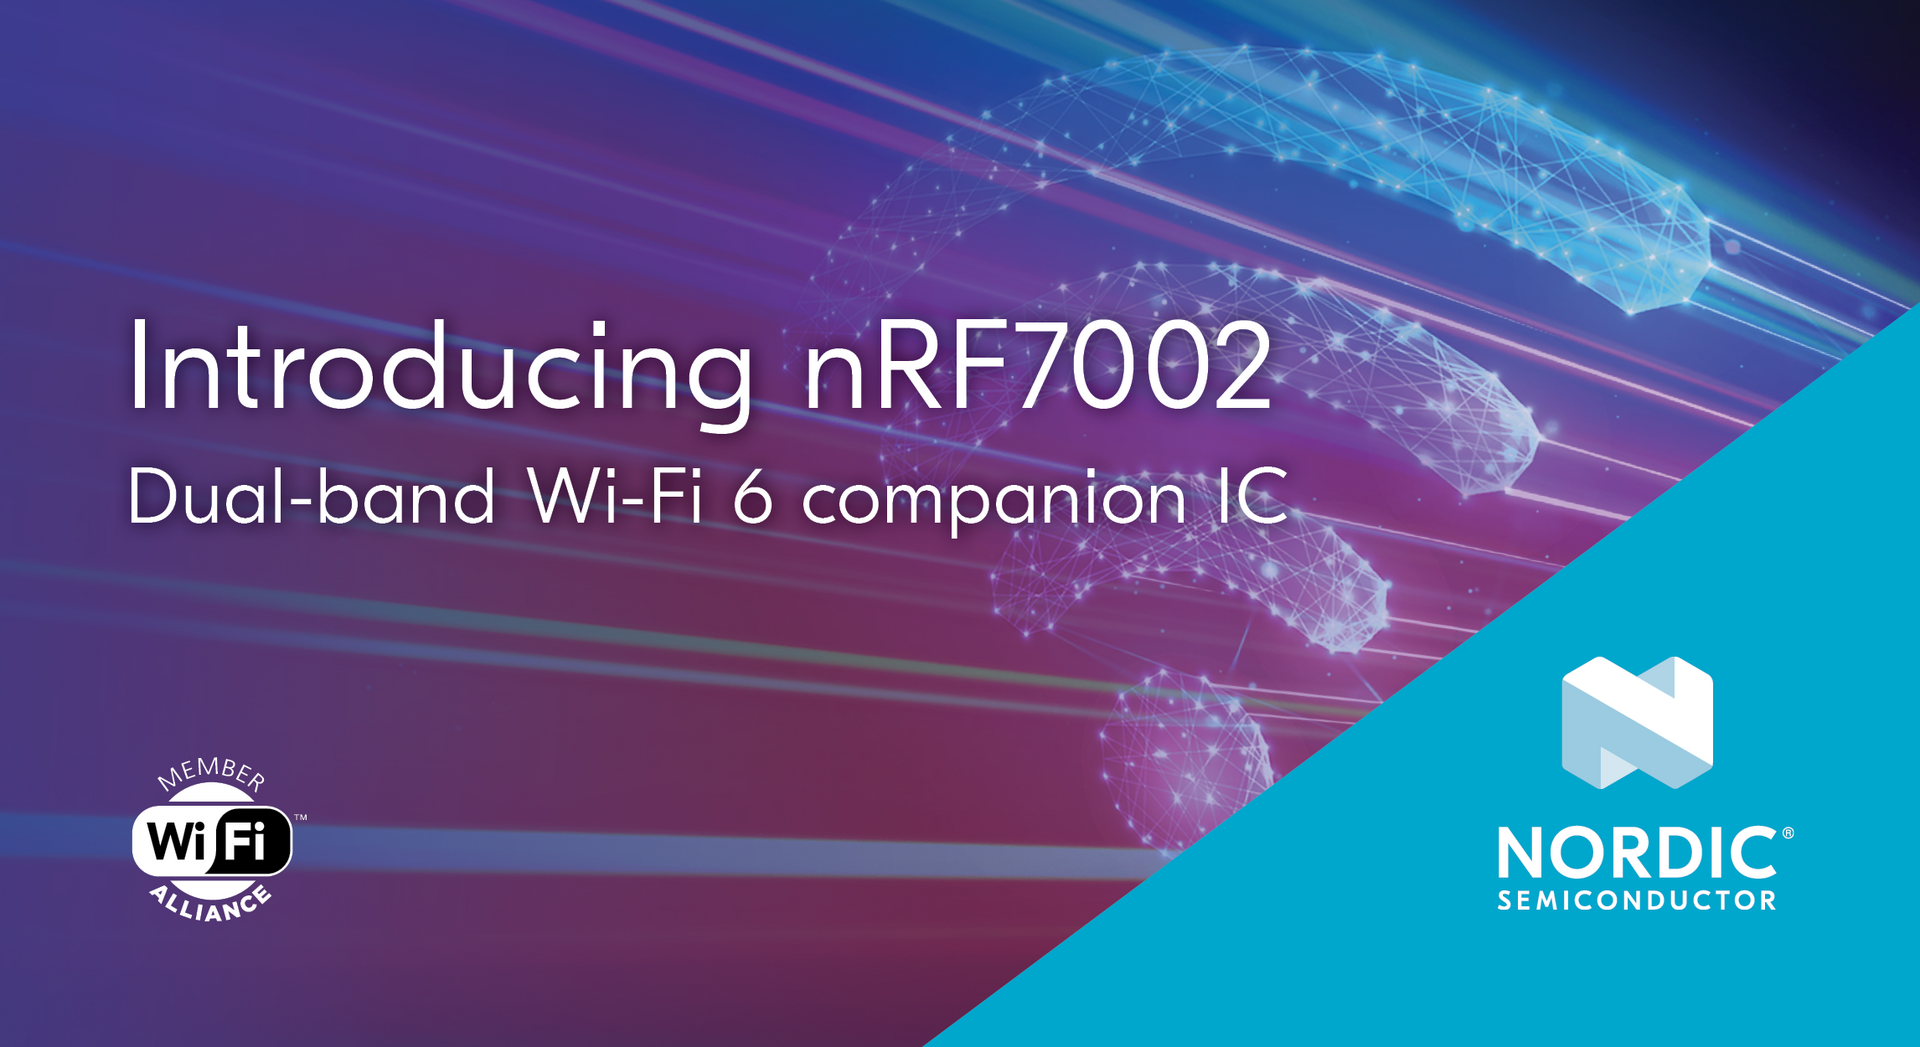 Introducing nRF7002 - Nordic´s first Wi-Fi IC